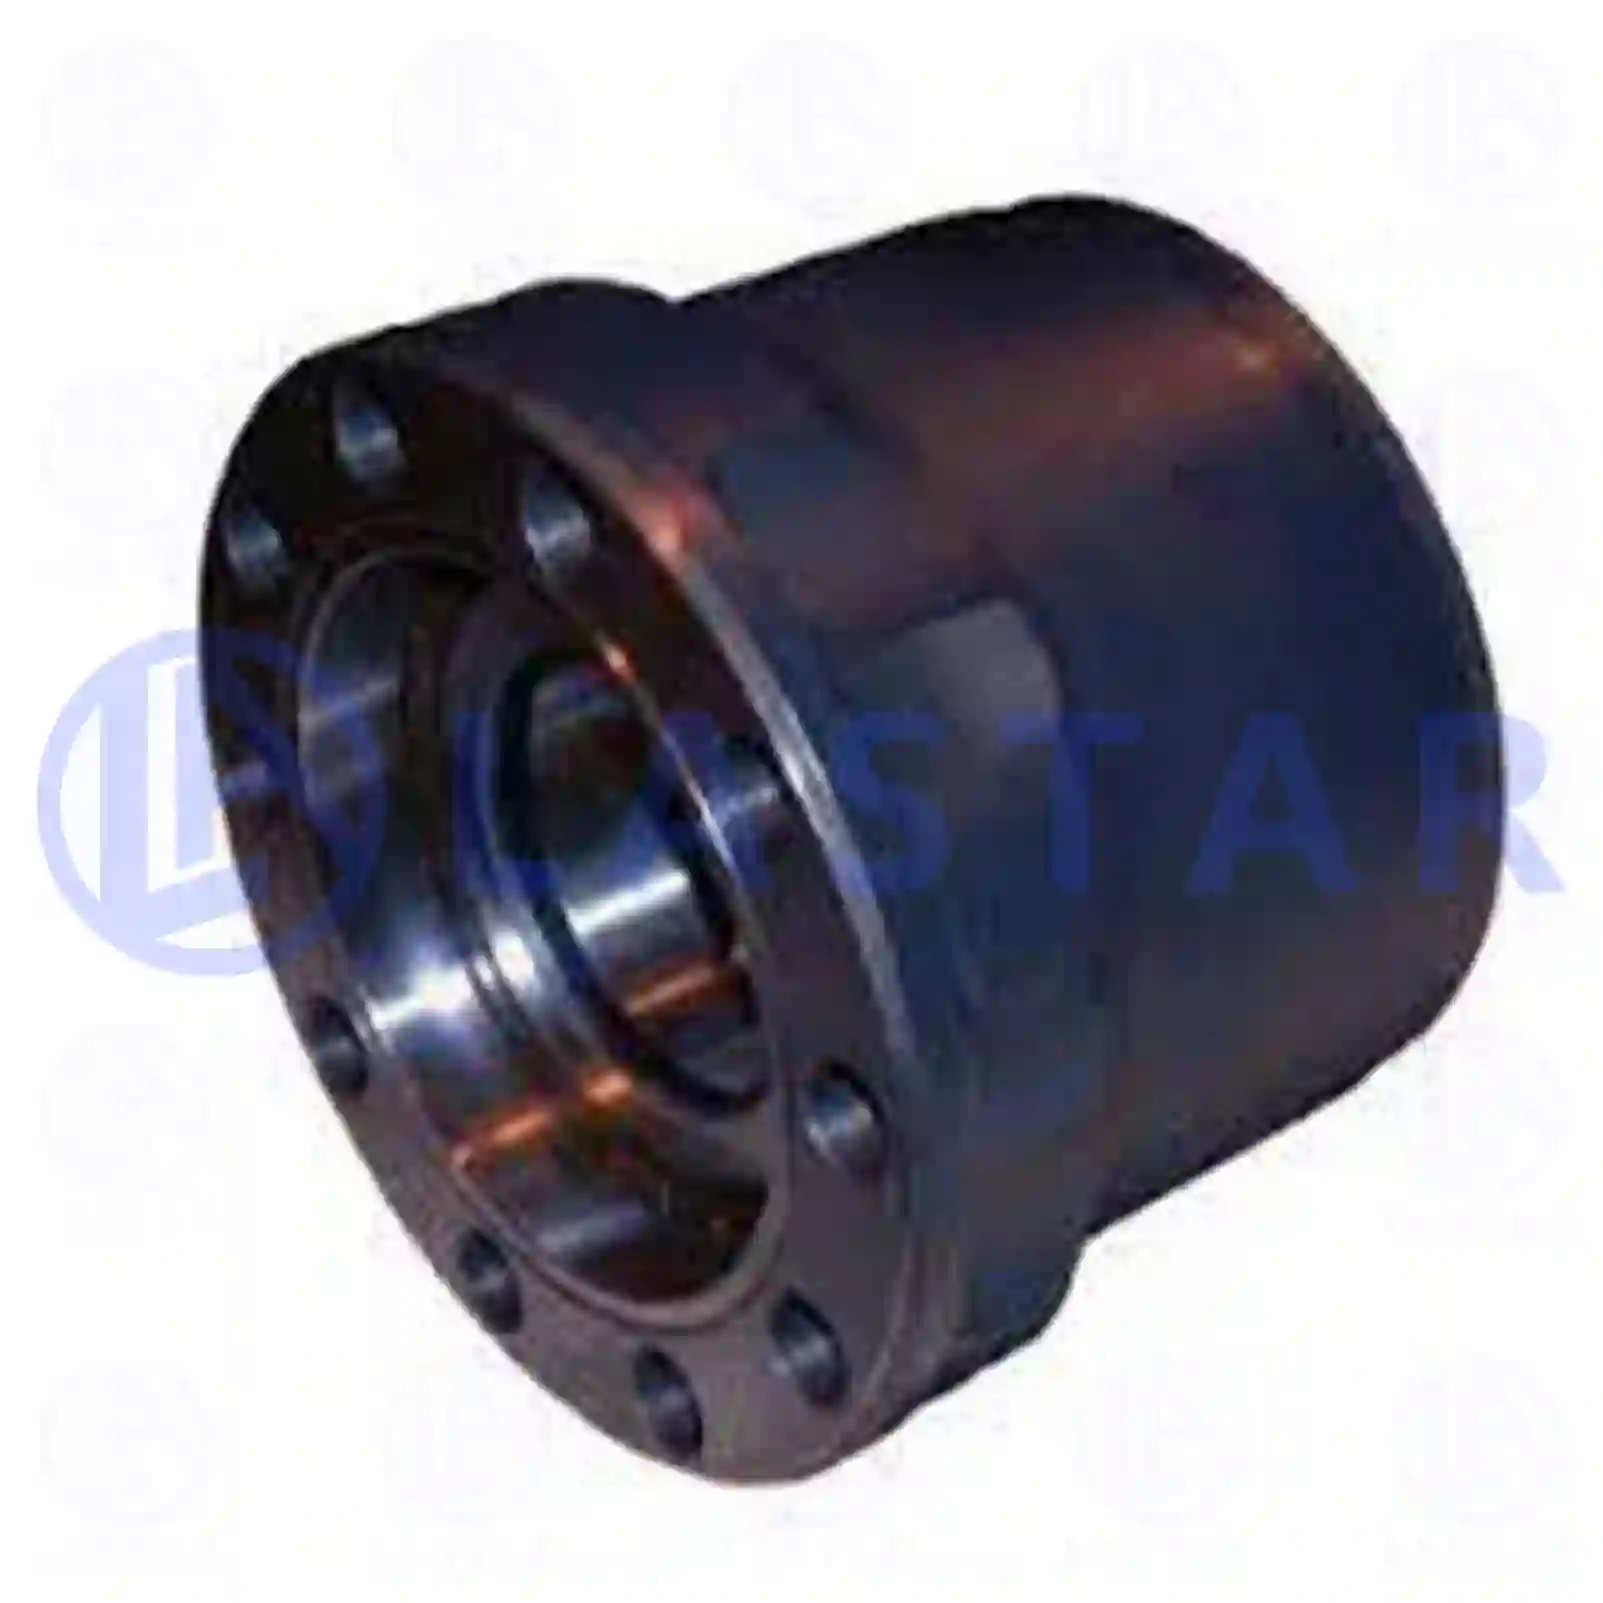  Wheel hub, with bearing || Lastar Spare Part | Truck Spare Parts, Auotomotive Spare Parts